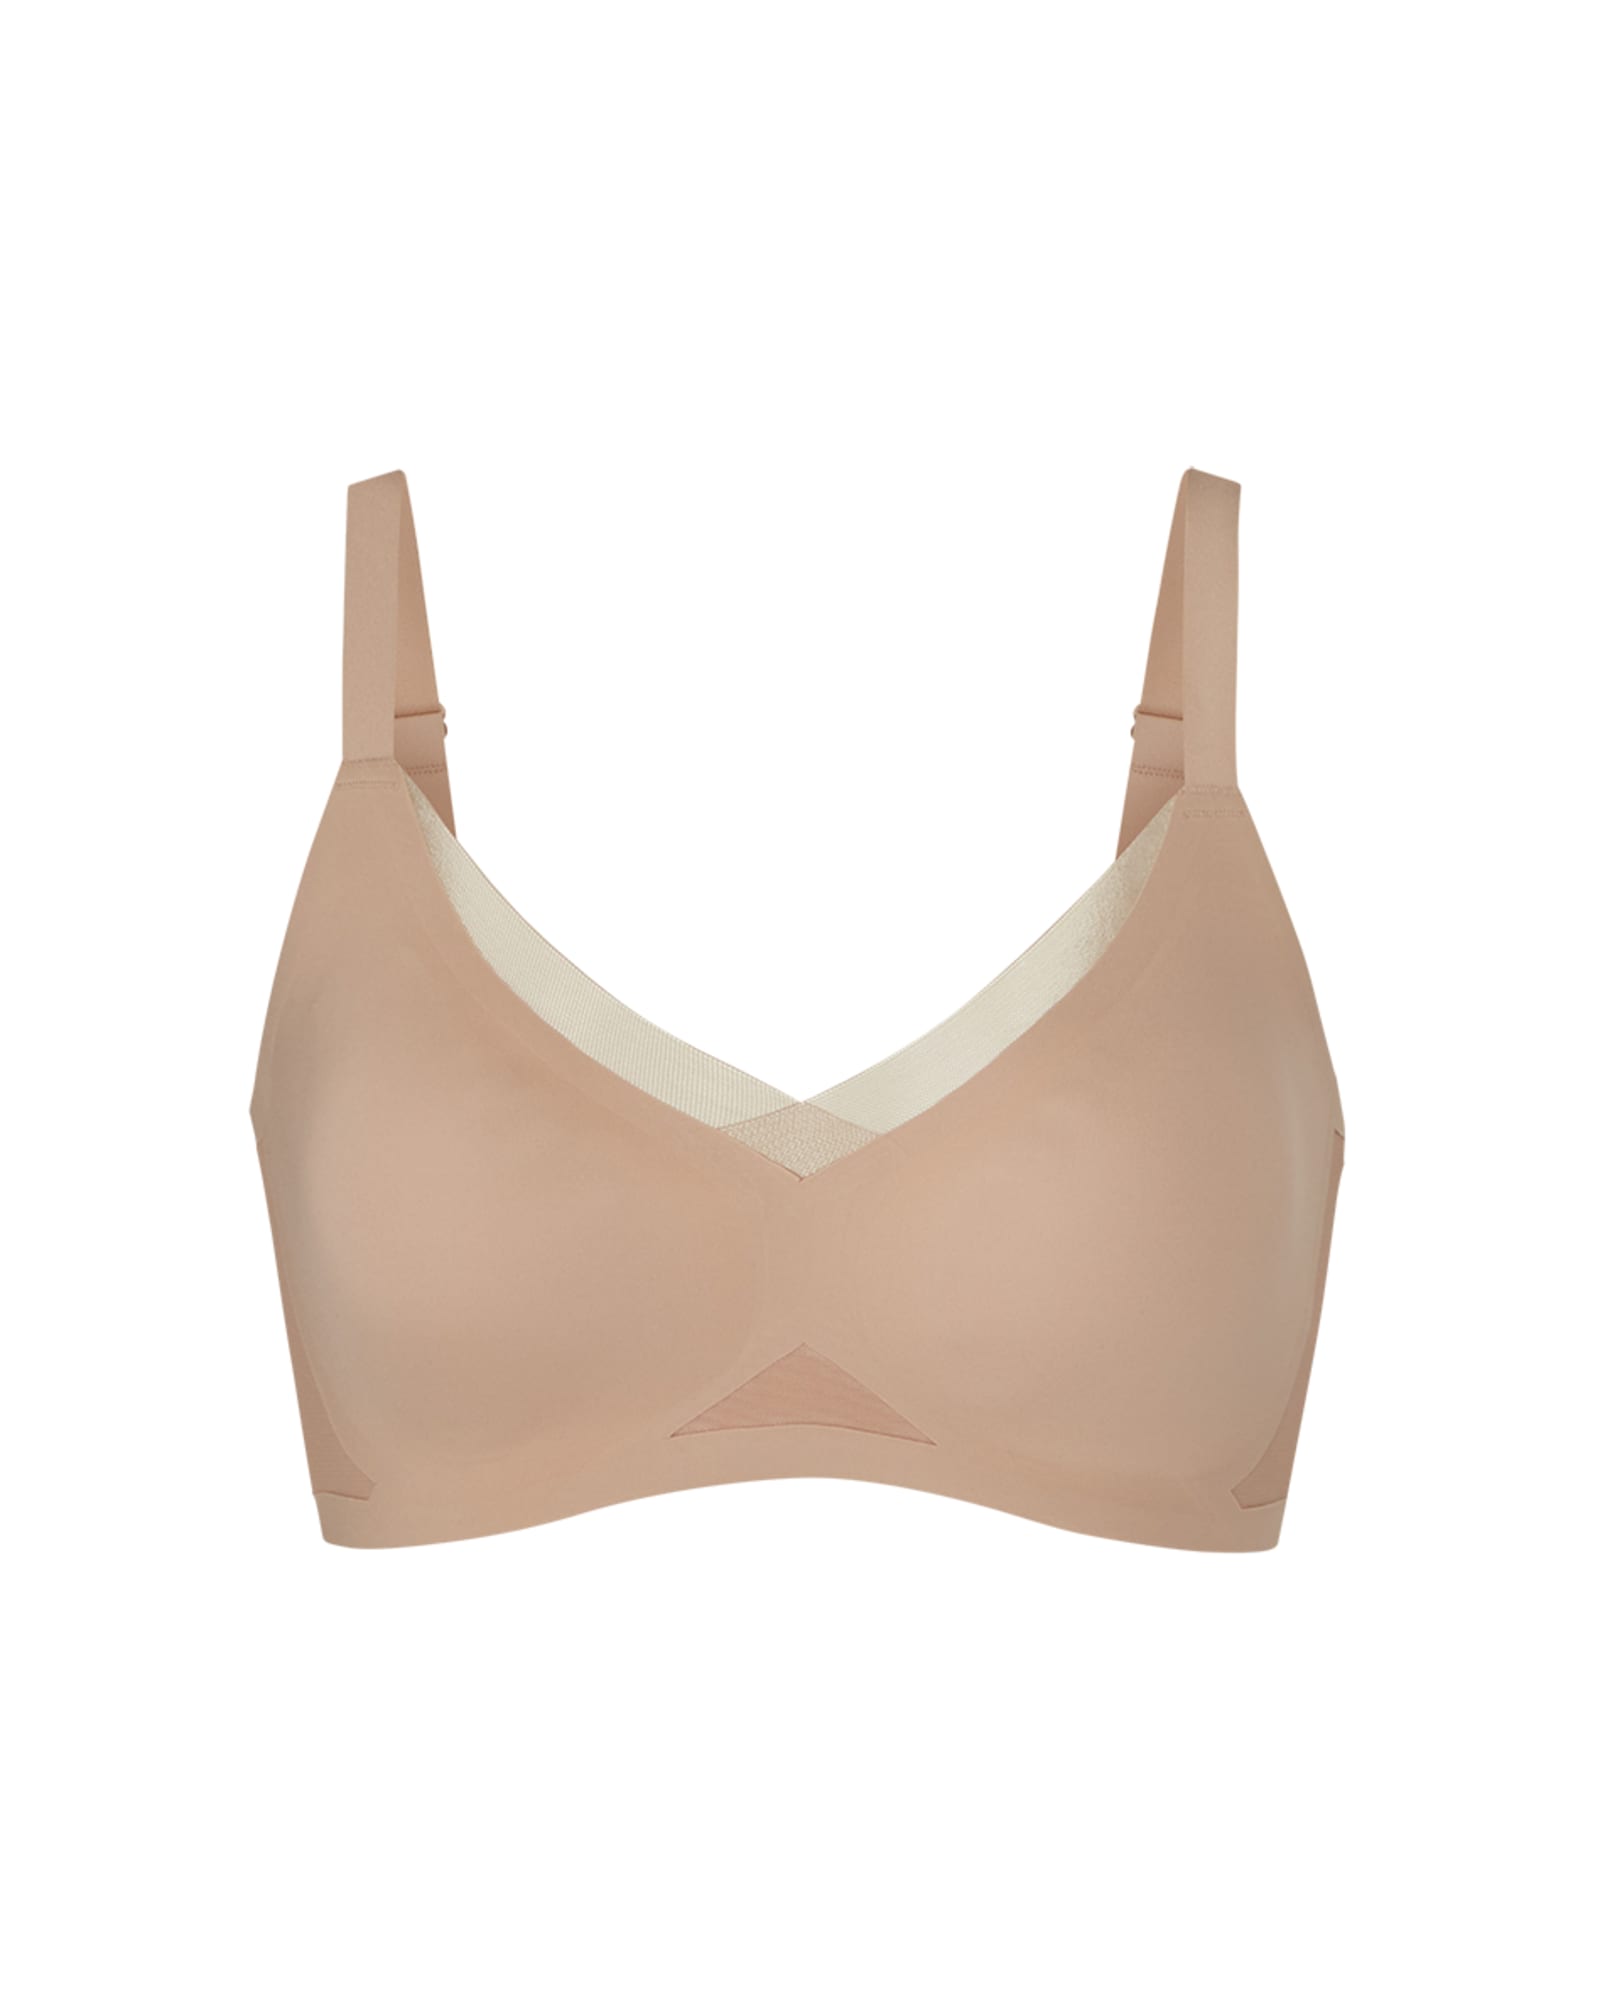  My Orders Placed Orders Placed by Me on  Everyday Bras  for Women Plus Size Adjustable Strap Full Coverage Bra Floral Embroidered  Bralette Casual Wireless Bra,Lightning Deals of Today Beige 